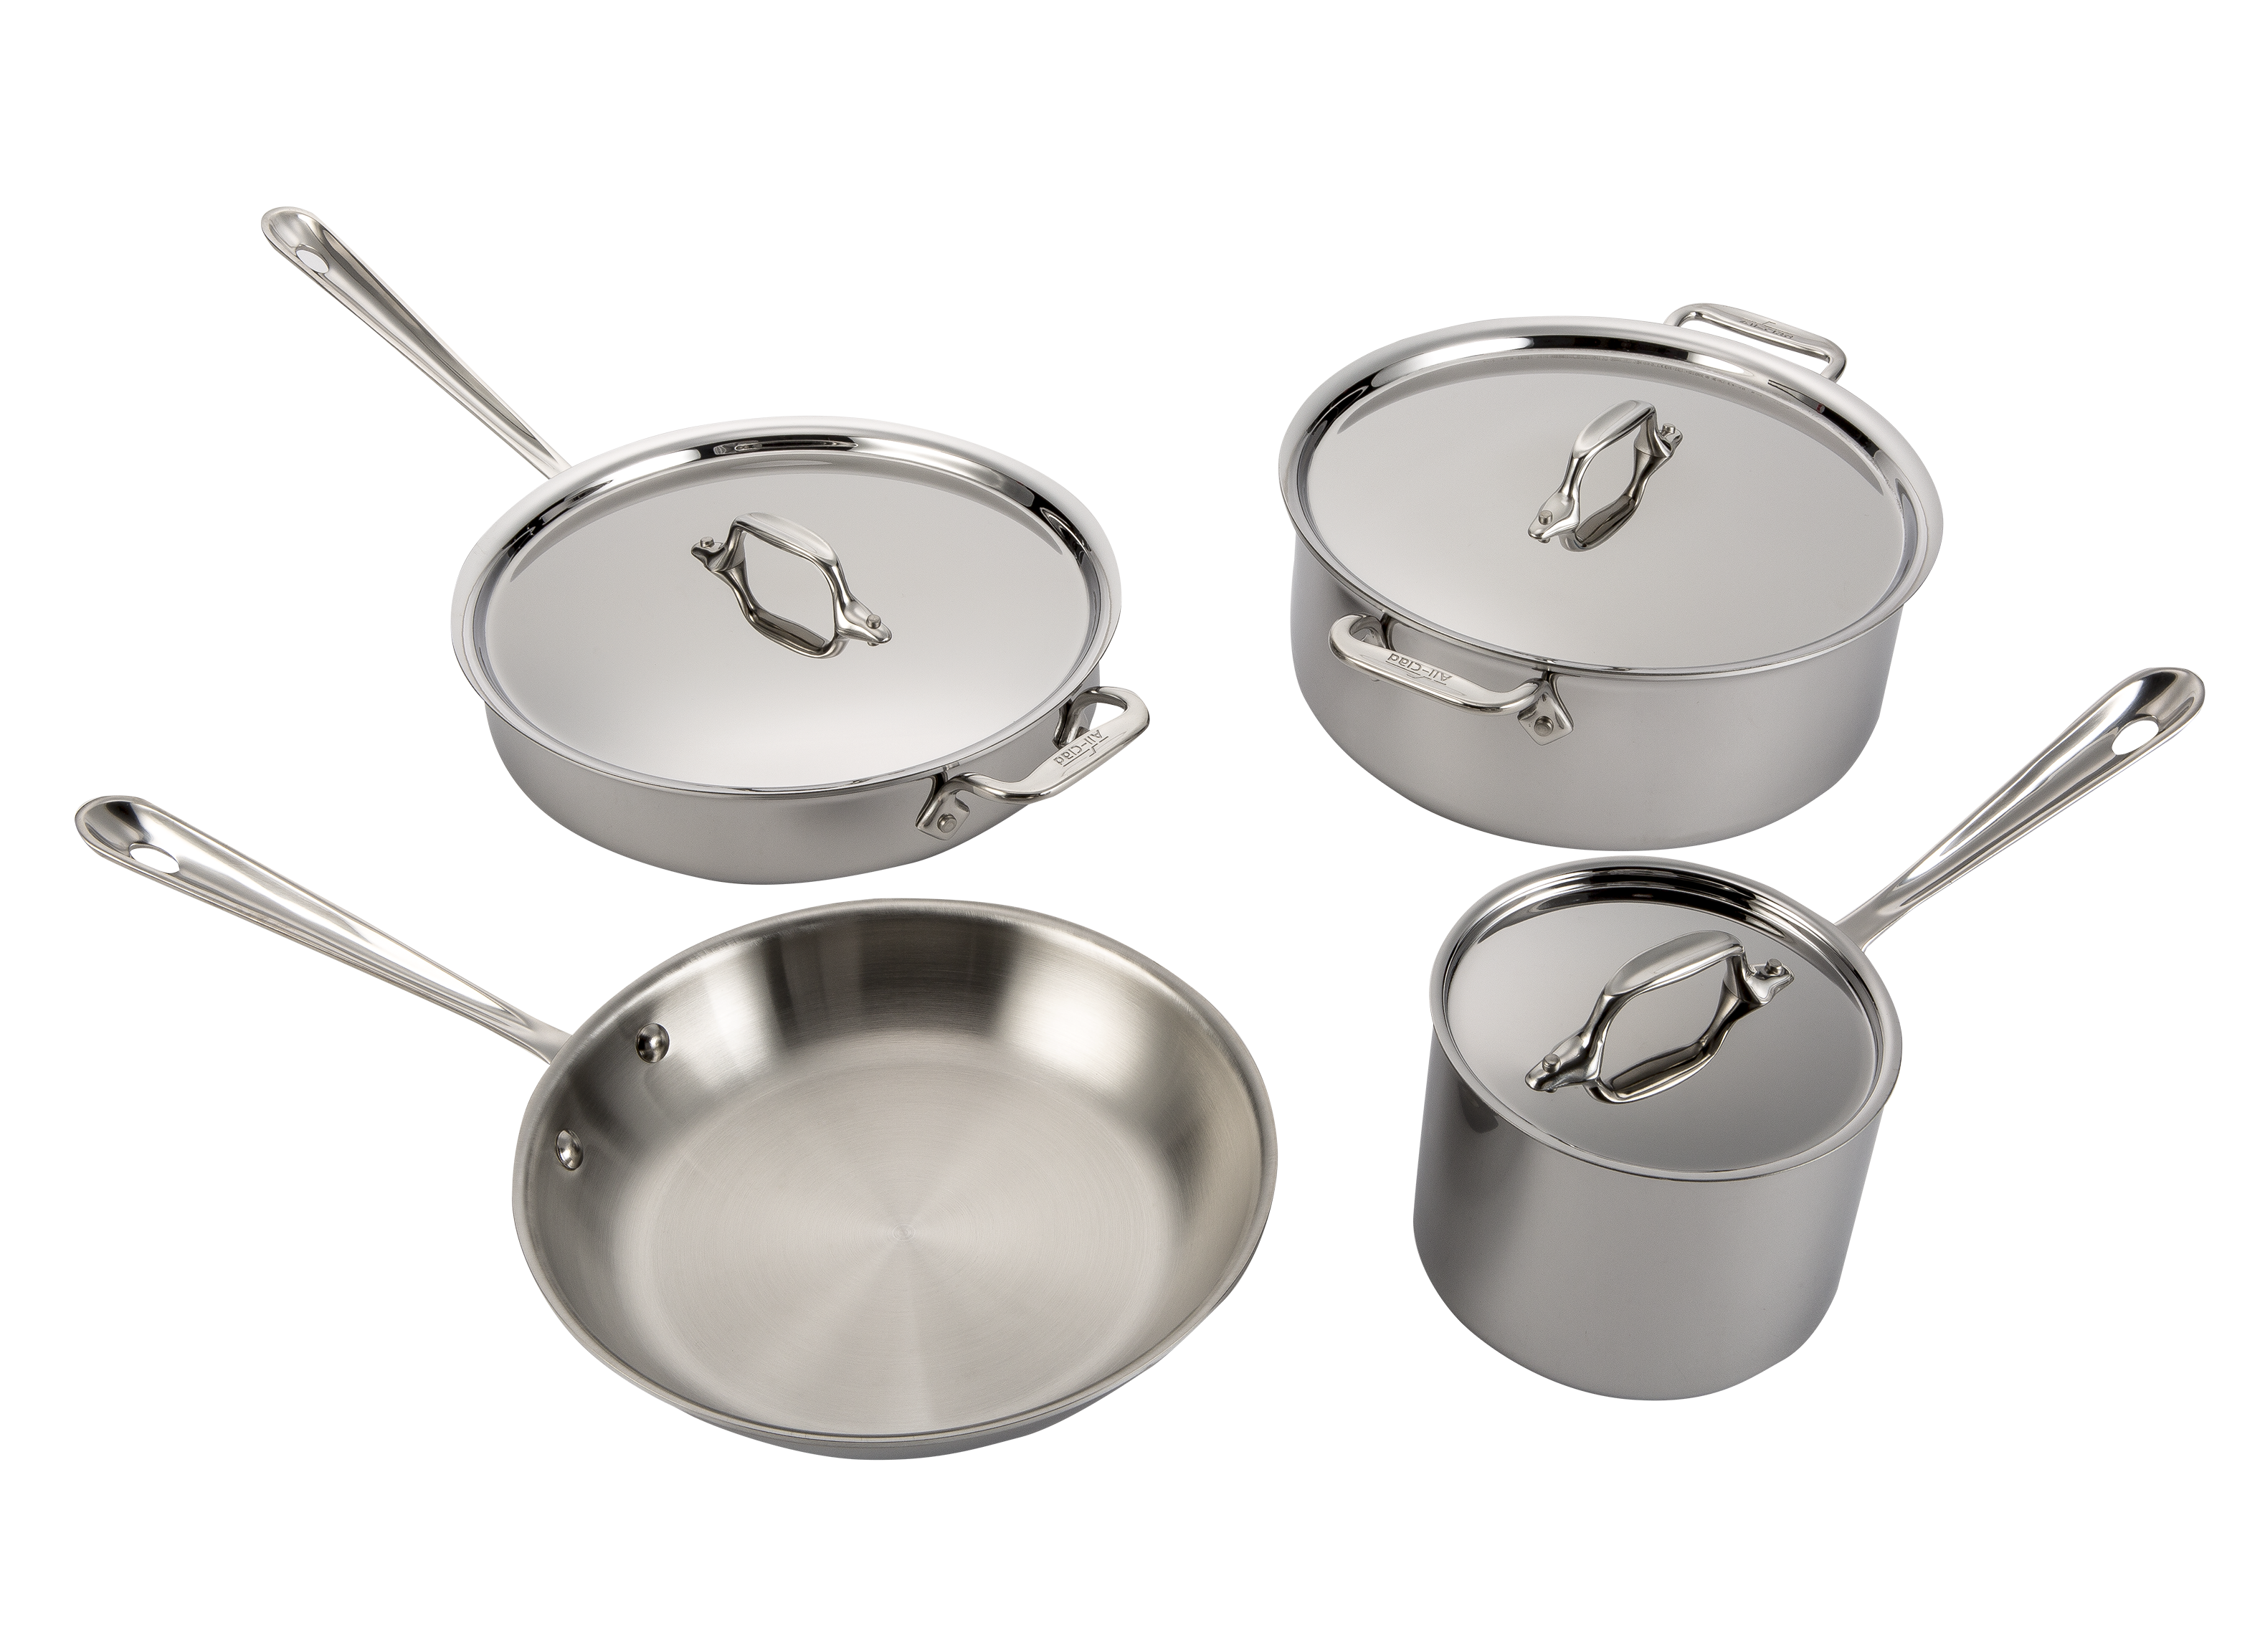 All-Clad Is Having A Massive Sale on Stainless Steel Cookware